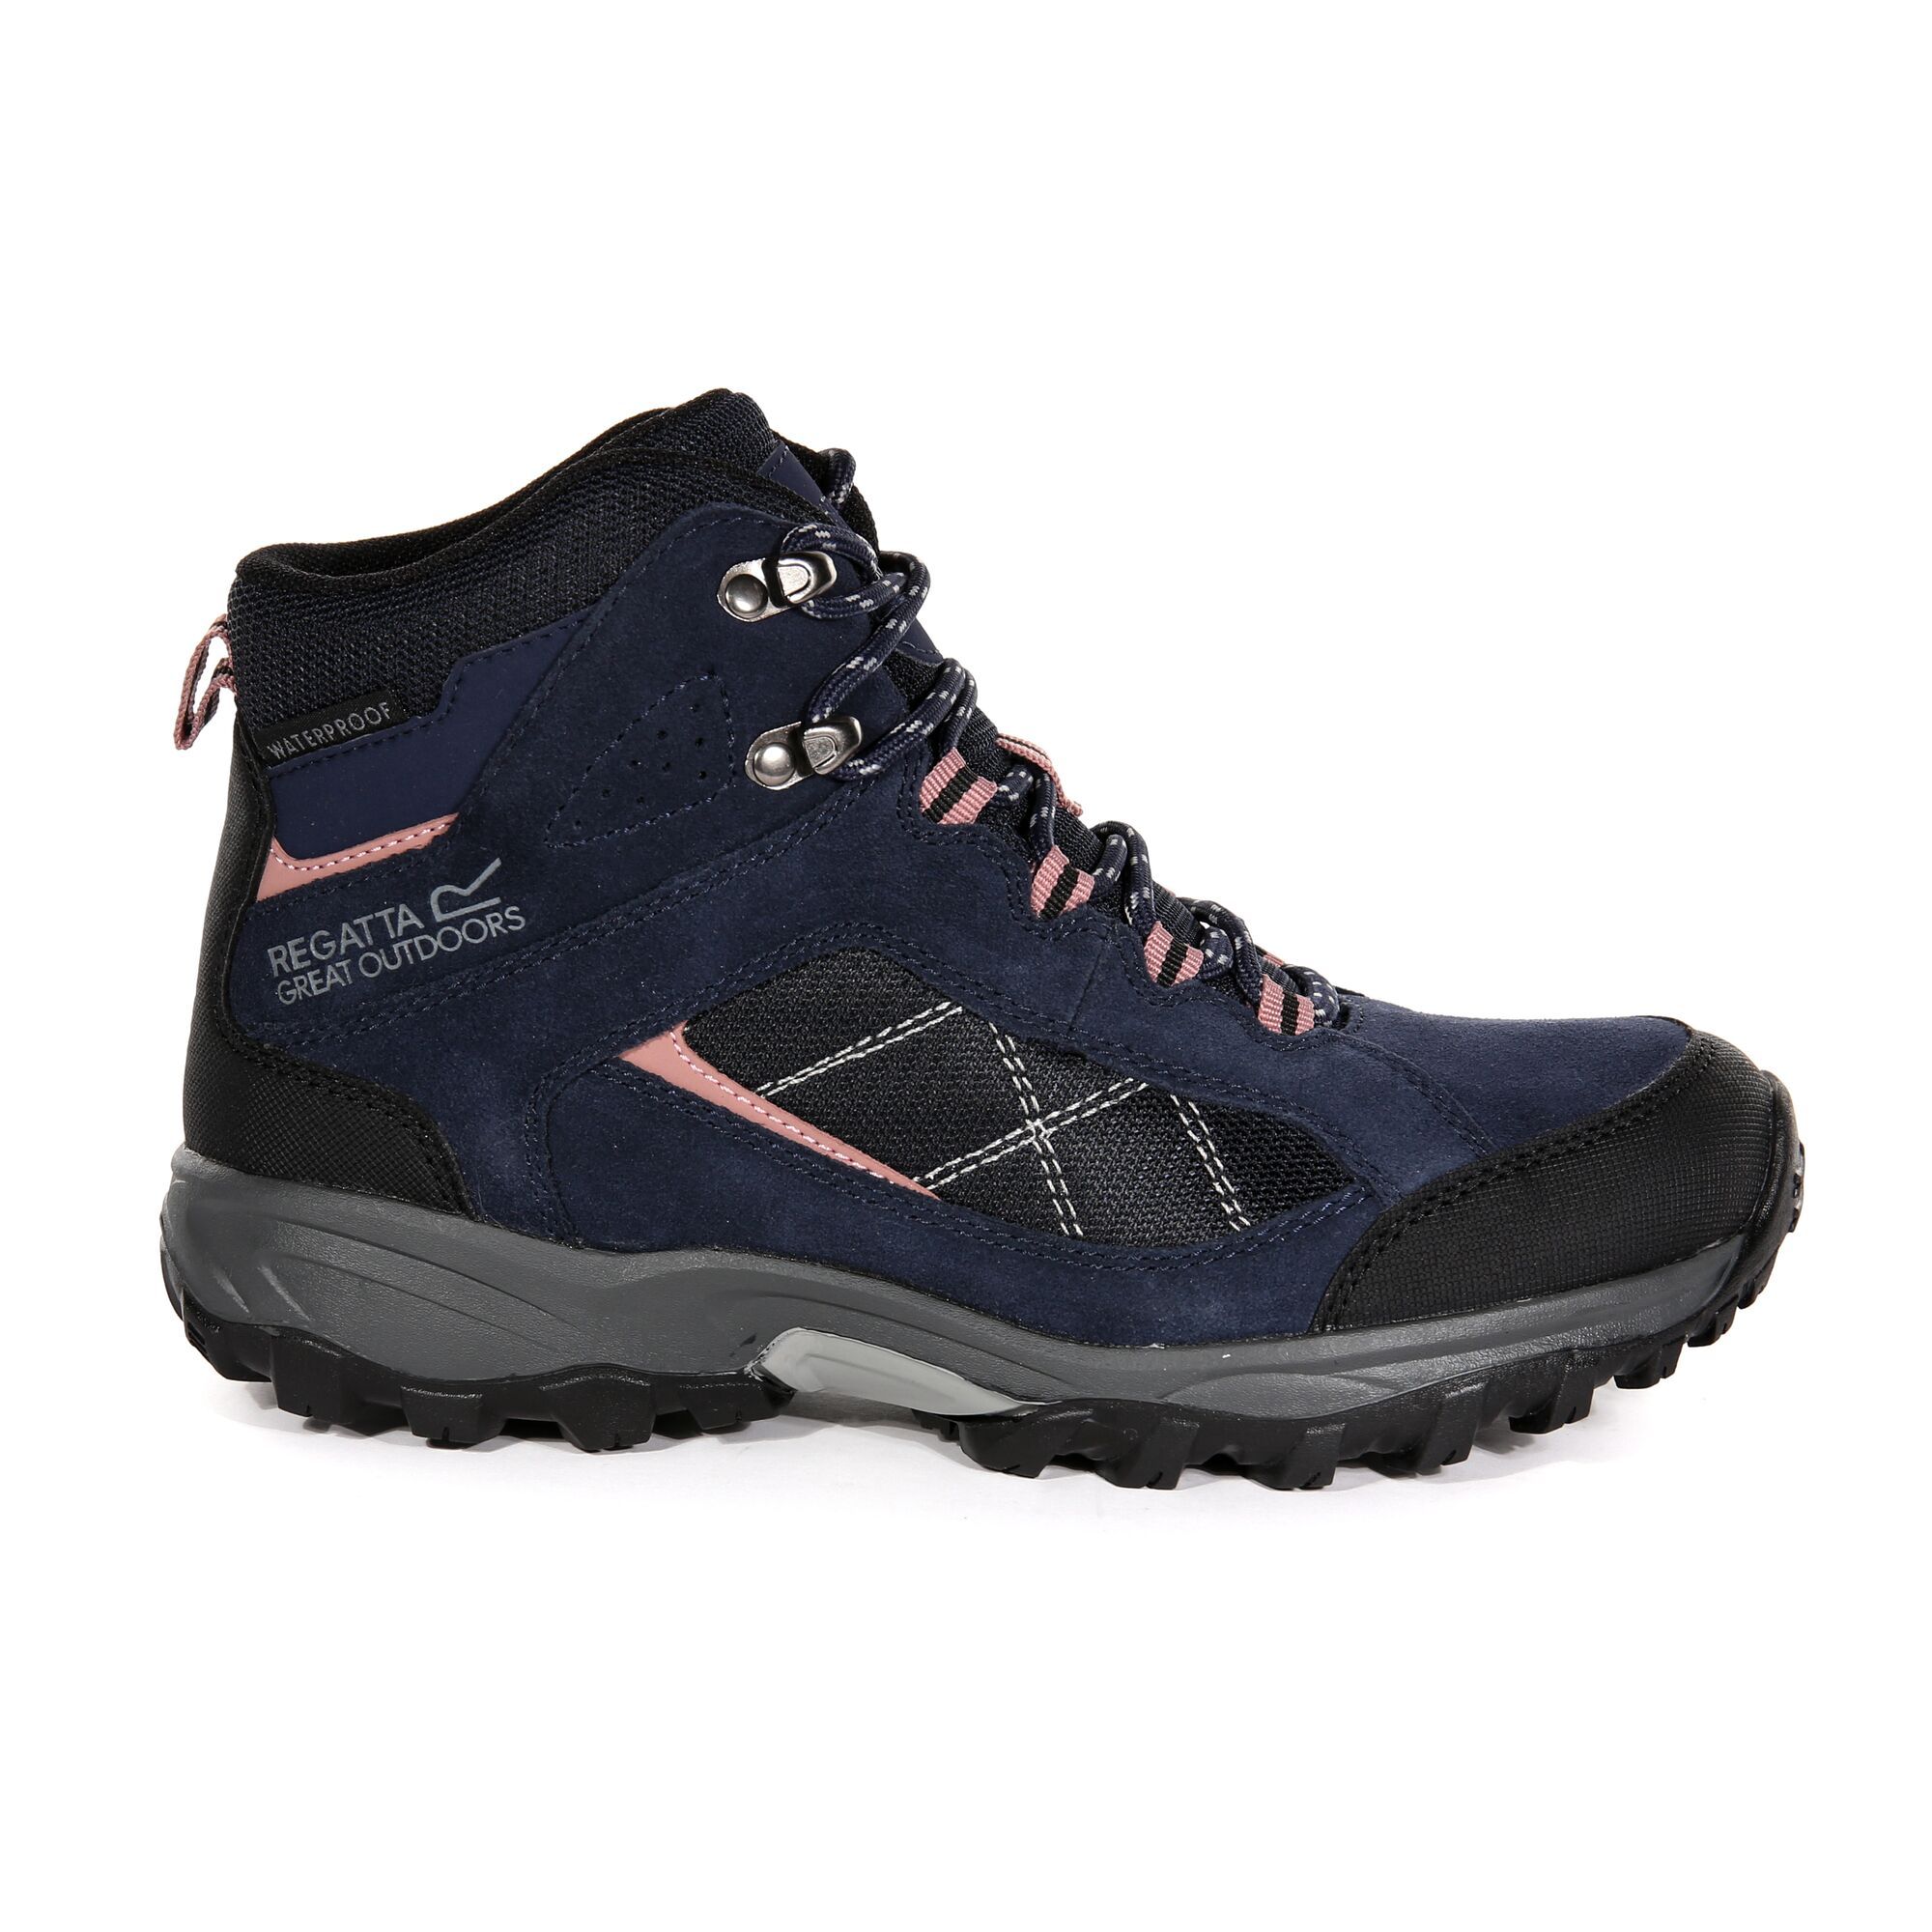 For fells to fields, trail to path, whatever the weather, the Lady Clydebank Hiking Boot offers reliable comfort and performance. The durable suede/mesh uppers use water shedding Hydropel technology with a waterproof /breathable Isotex membrane to keep feet dry inside and out. Tough wearing rubber overlays around the toe and heel and stabilising ankle padding protect on uneven ground. DuoPoint sole technology engineered with targeted cushioning minimises shock and fatigue on longer hikes.